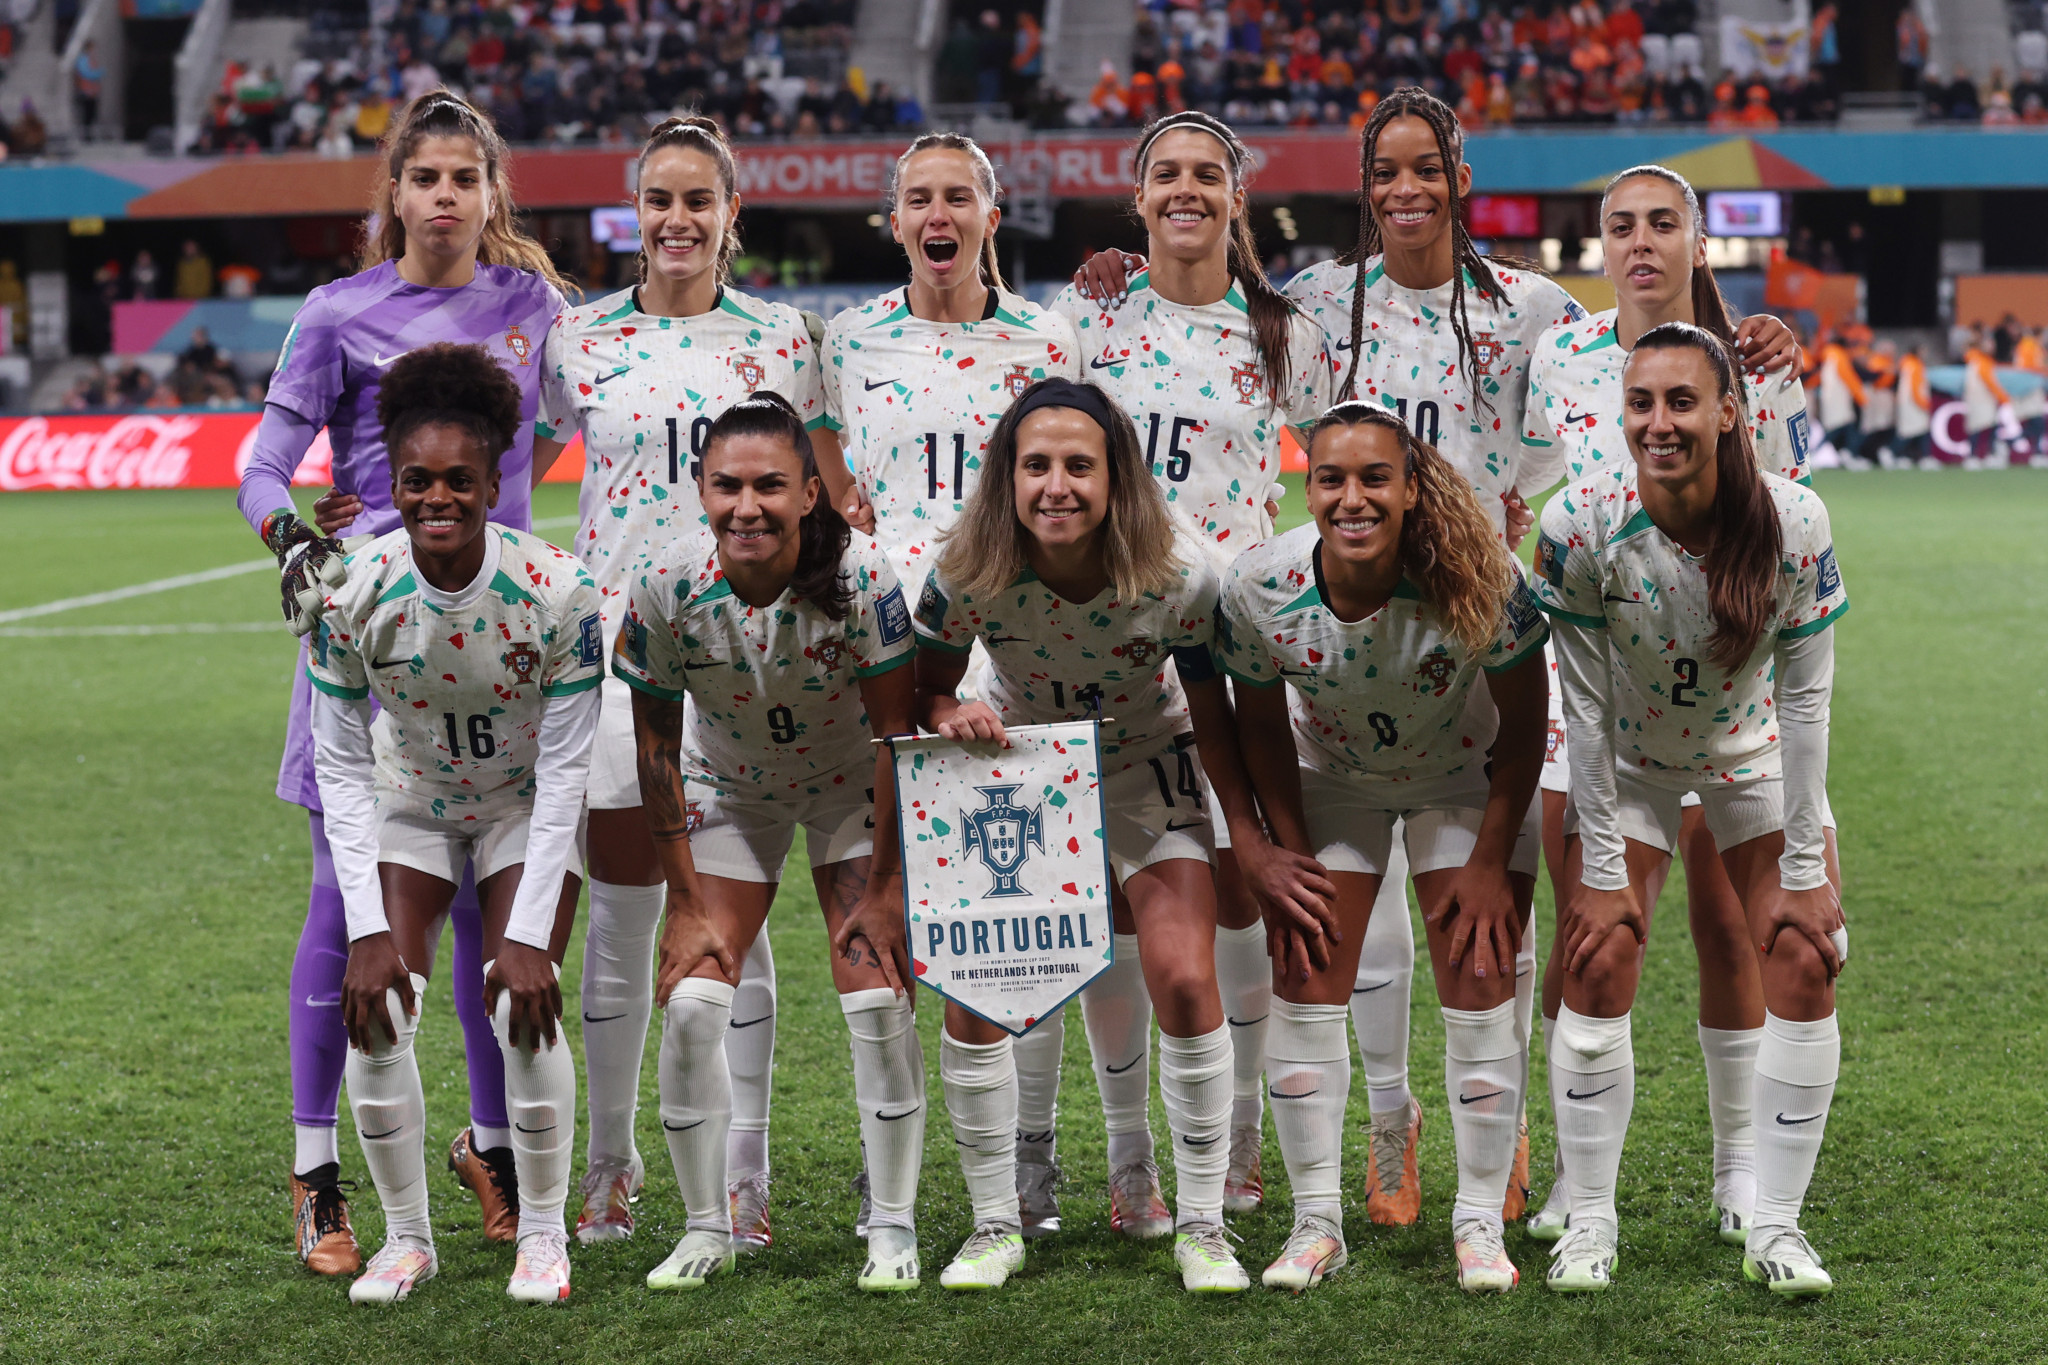 Portugal are one of eight teams making their FIFA Women's World Cup debut in Australia and New Zealand, but rarely looked like denying The Netherlands a winning start in Dunedin ©Getty Images